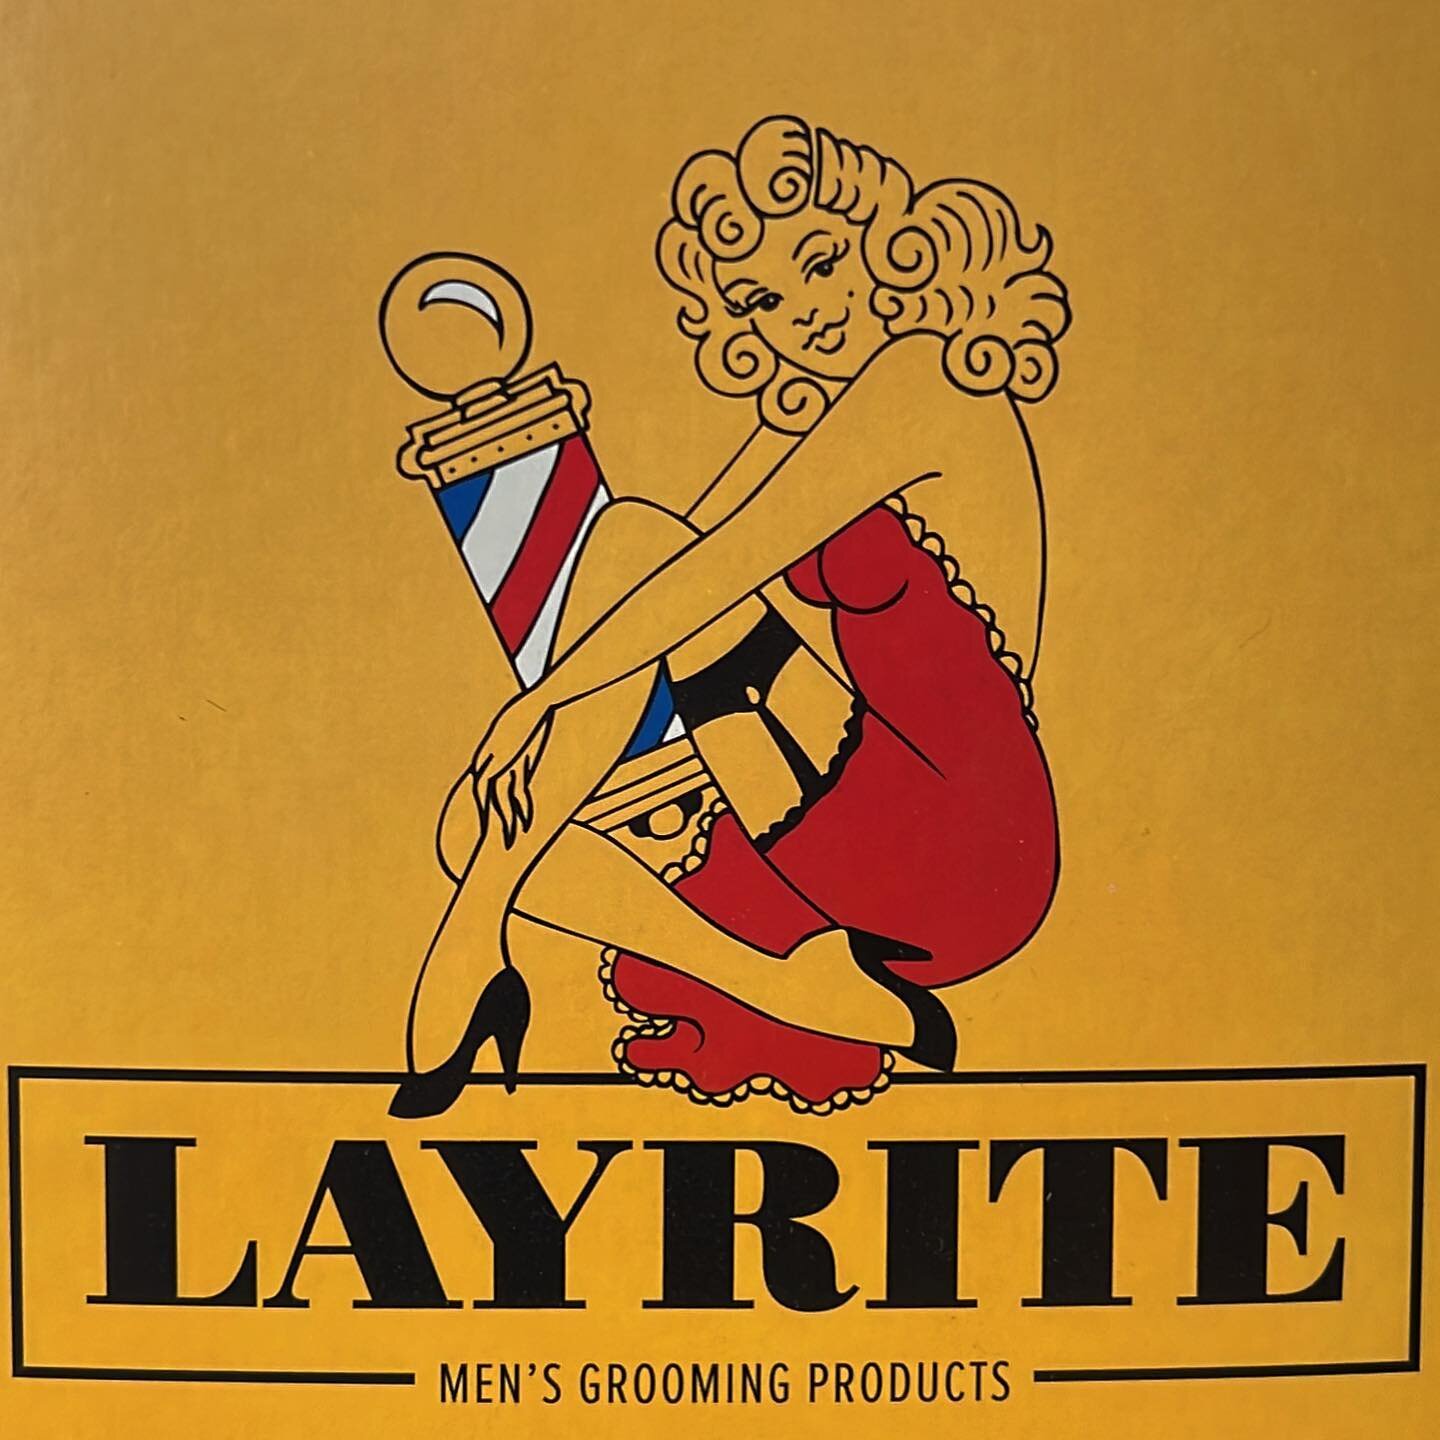 Proud carriers of Layrite Men&rsquo;s Grooming Products!